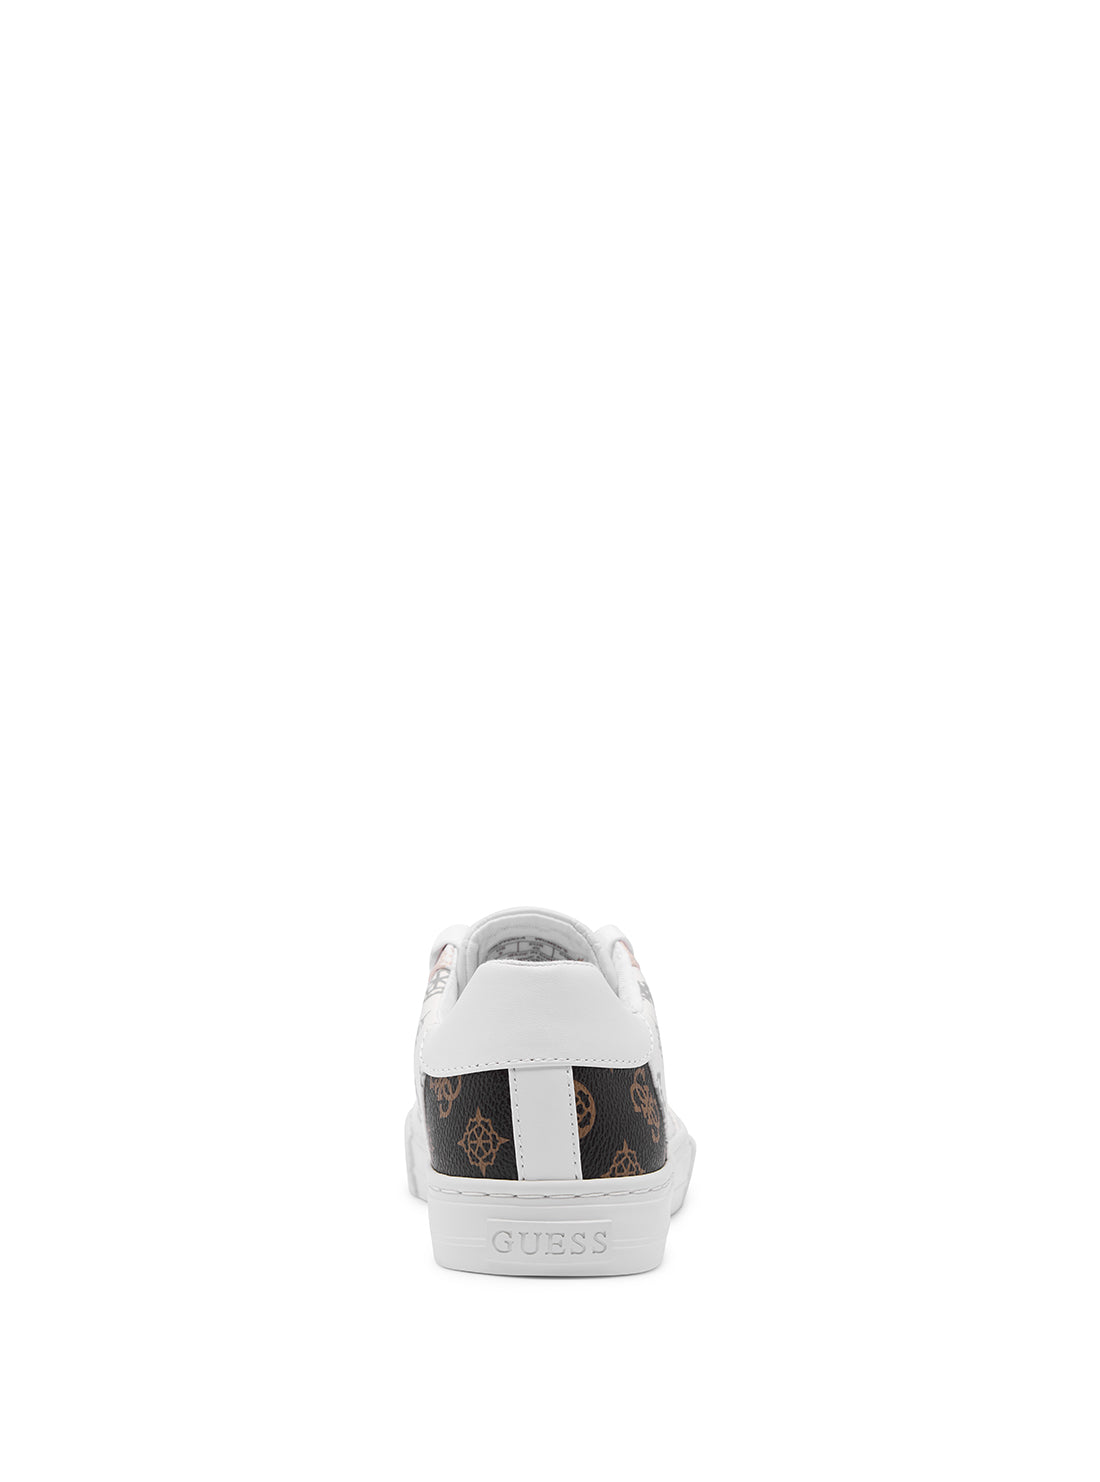 GUESS White Logo Loven Low-Top Sneakers back view